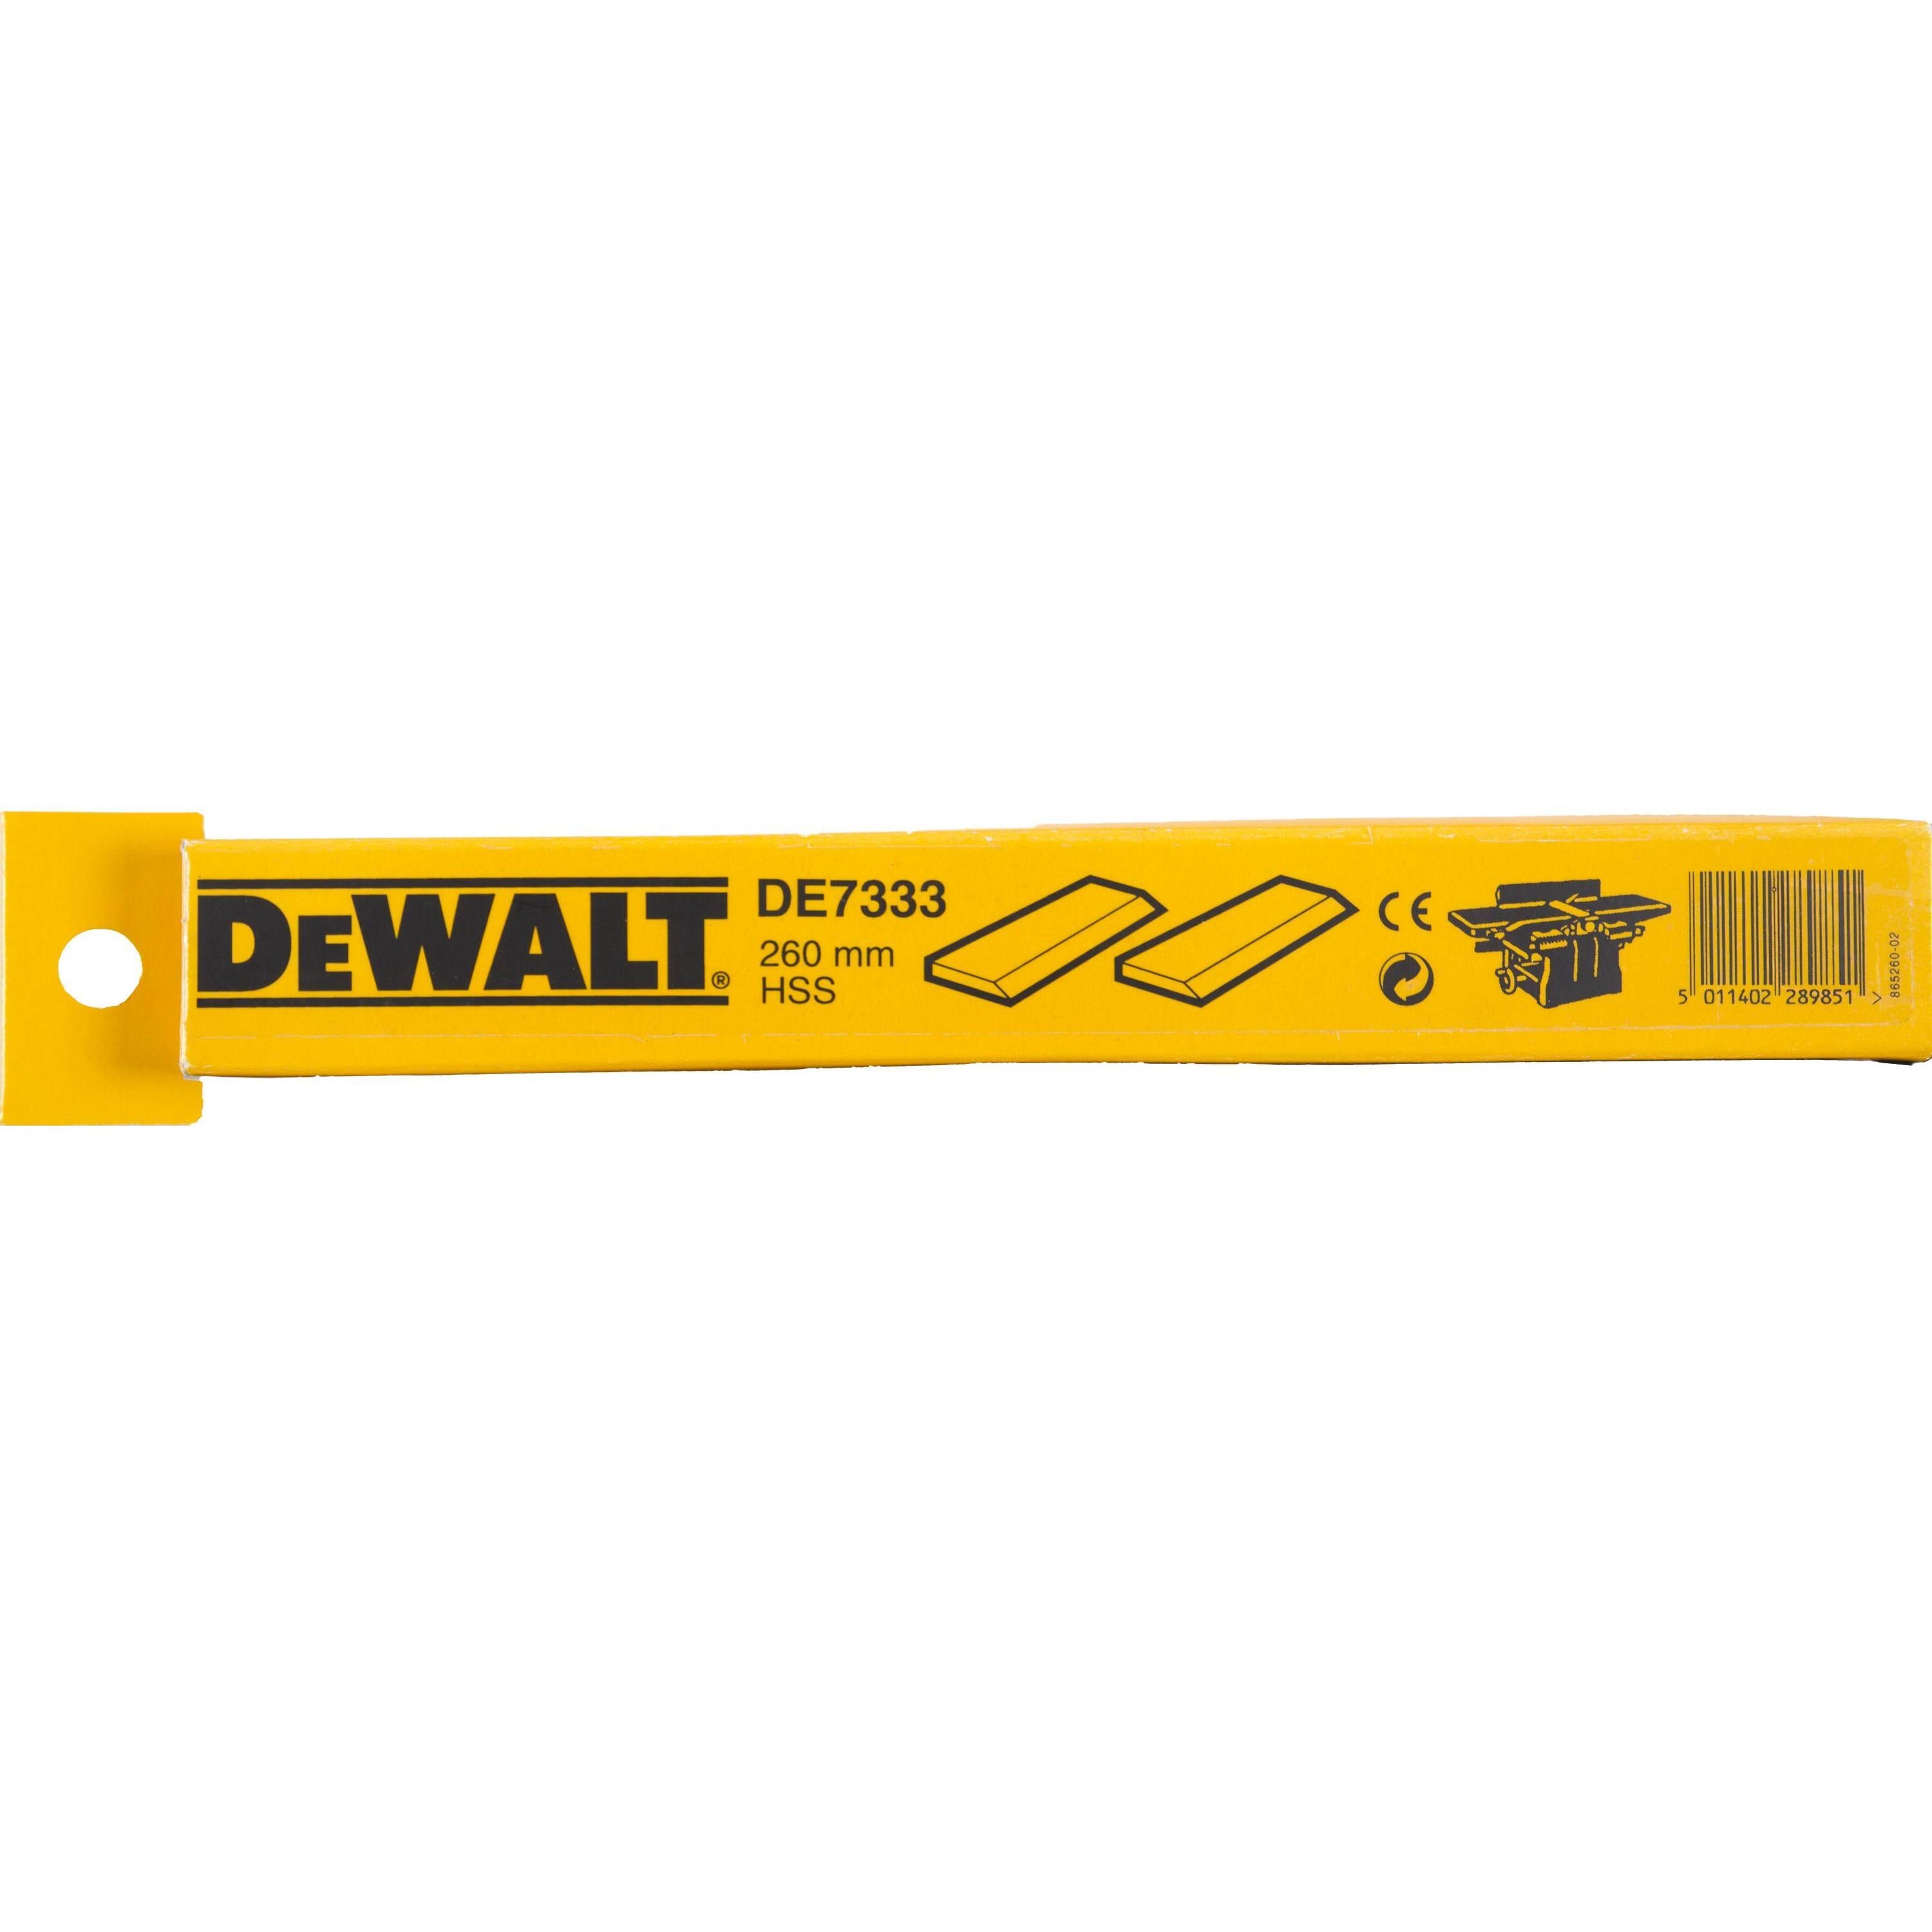 Dewalt Knives Hss (Pair) For The Dw733S Power Tool Services